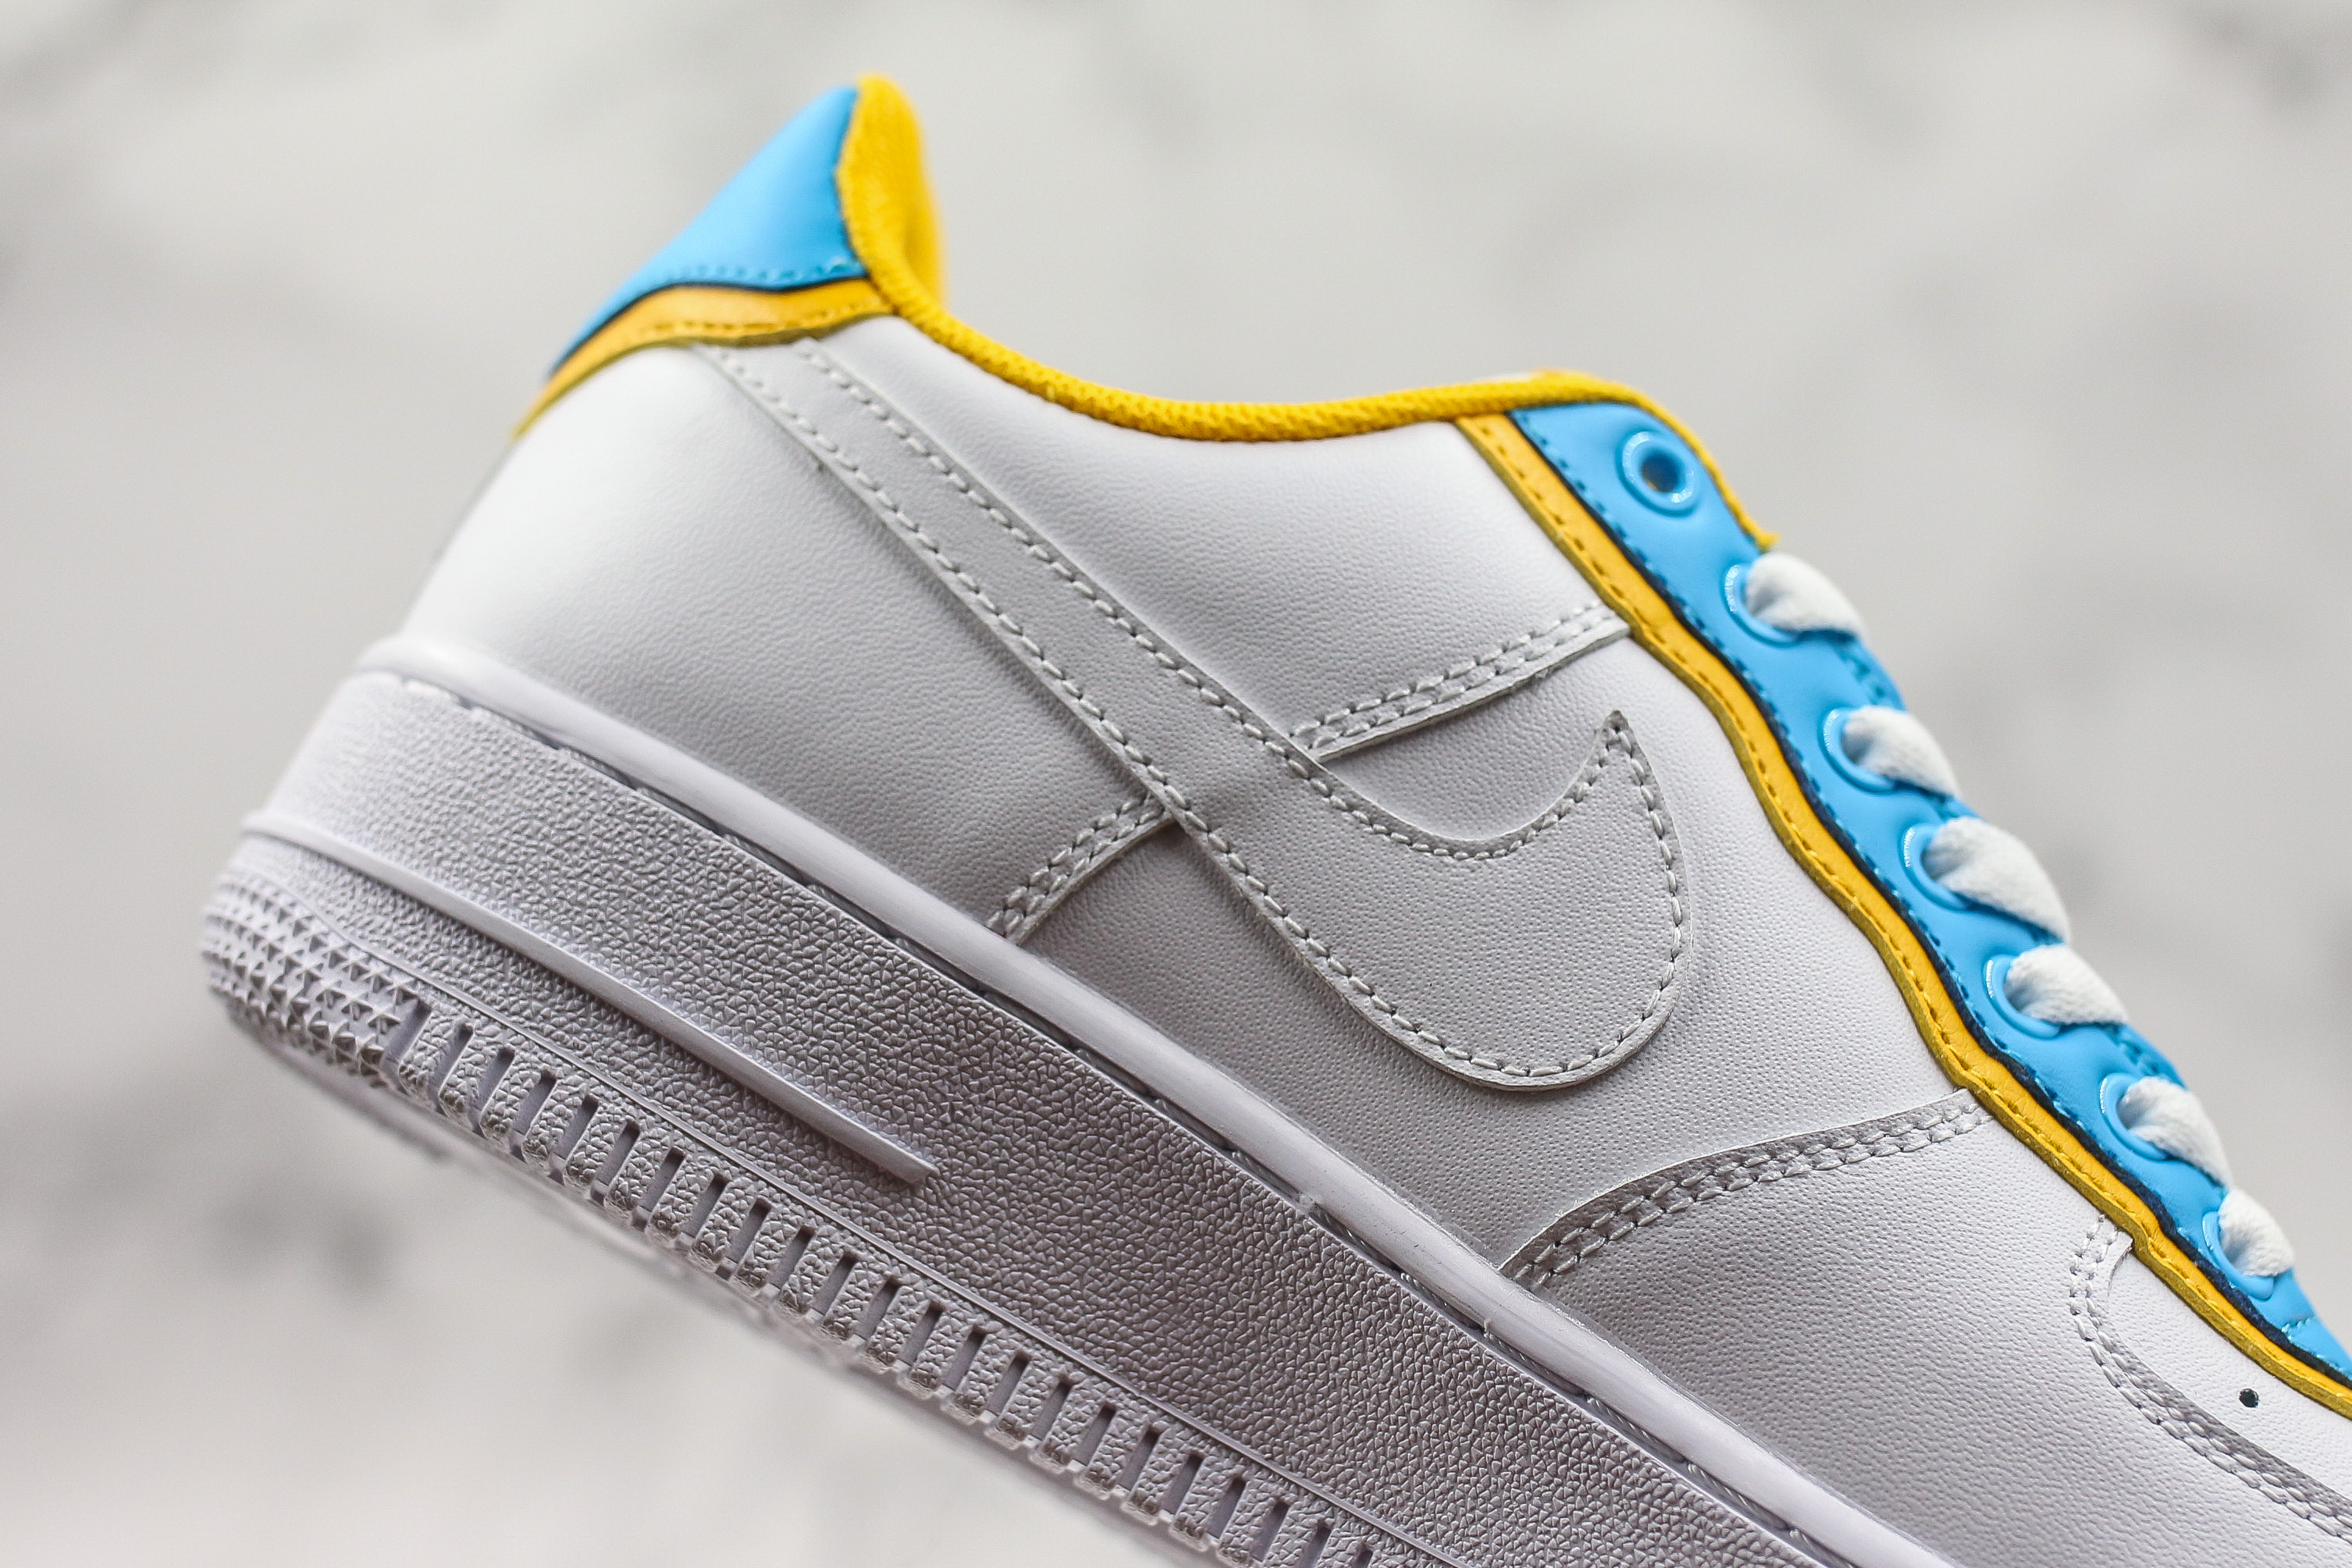 white and yellow af1